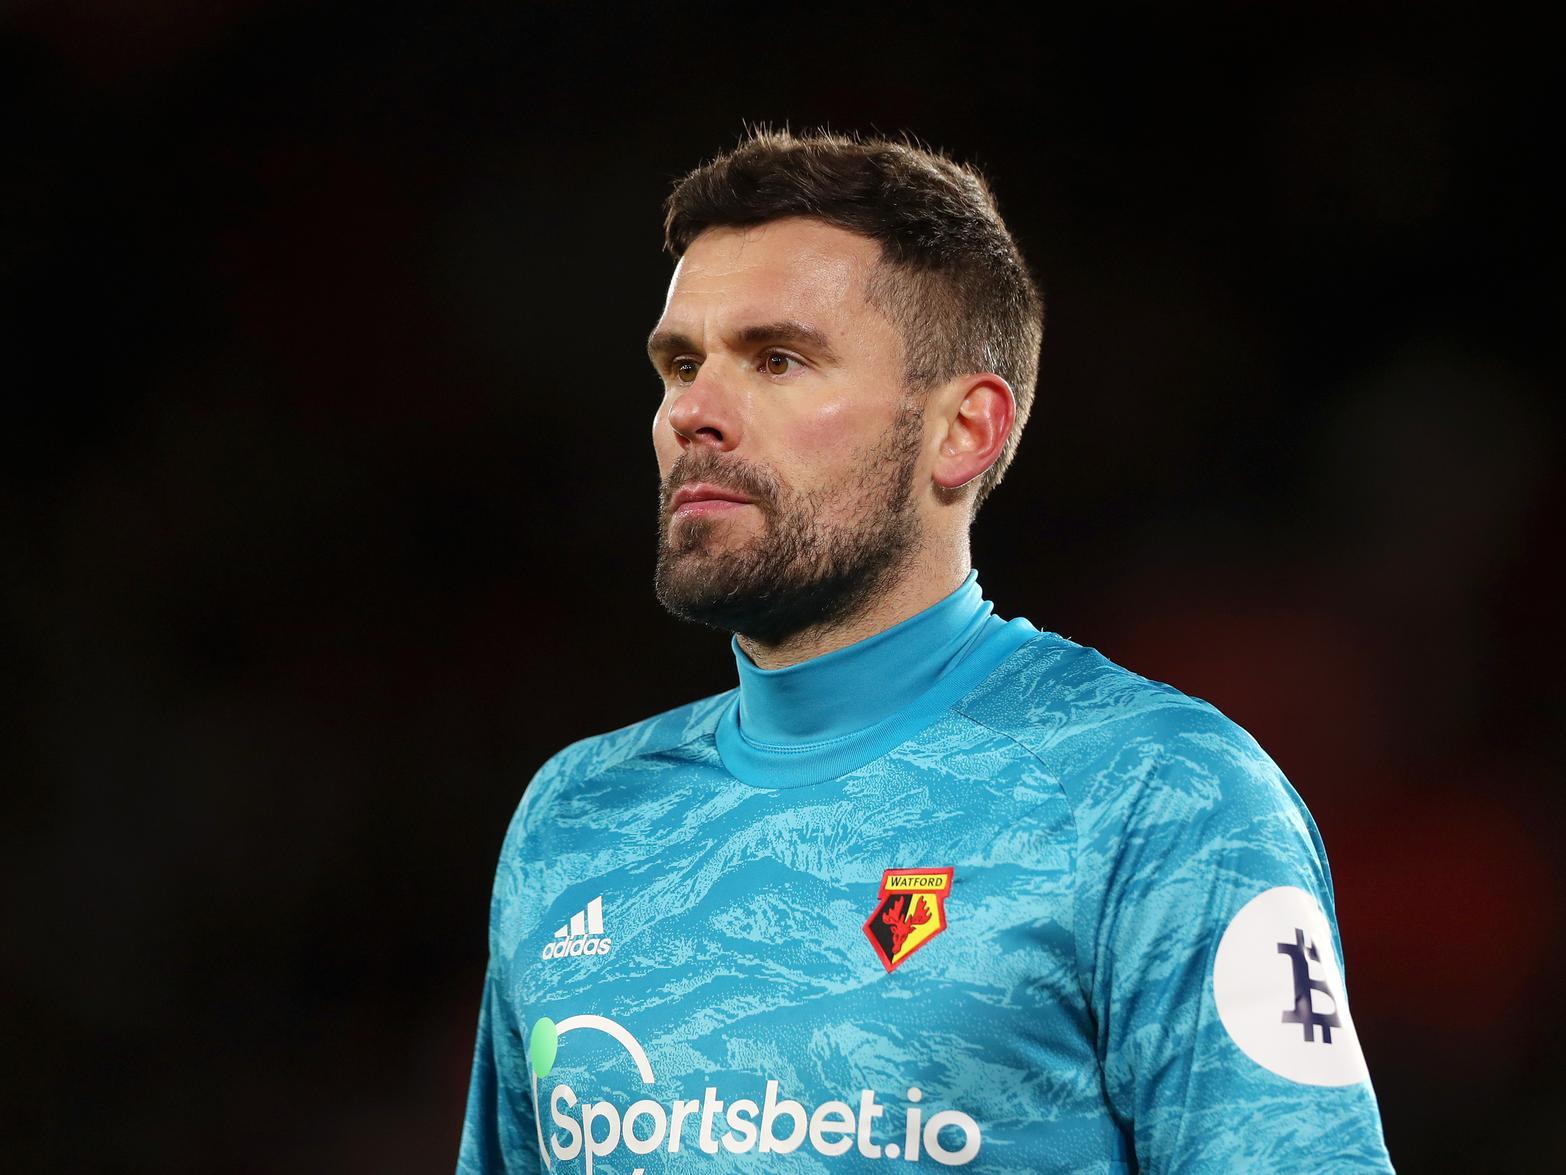 Sheffield United will move for former England goalkeeper Ben Foster, 36, if Watford are relegated at the end of the season. (Sun on Sunday)